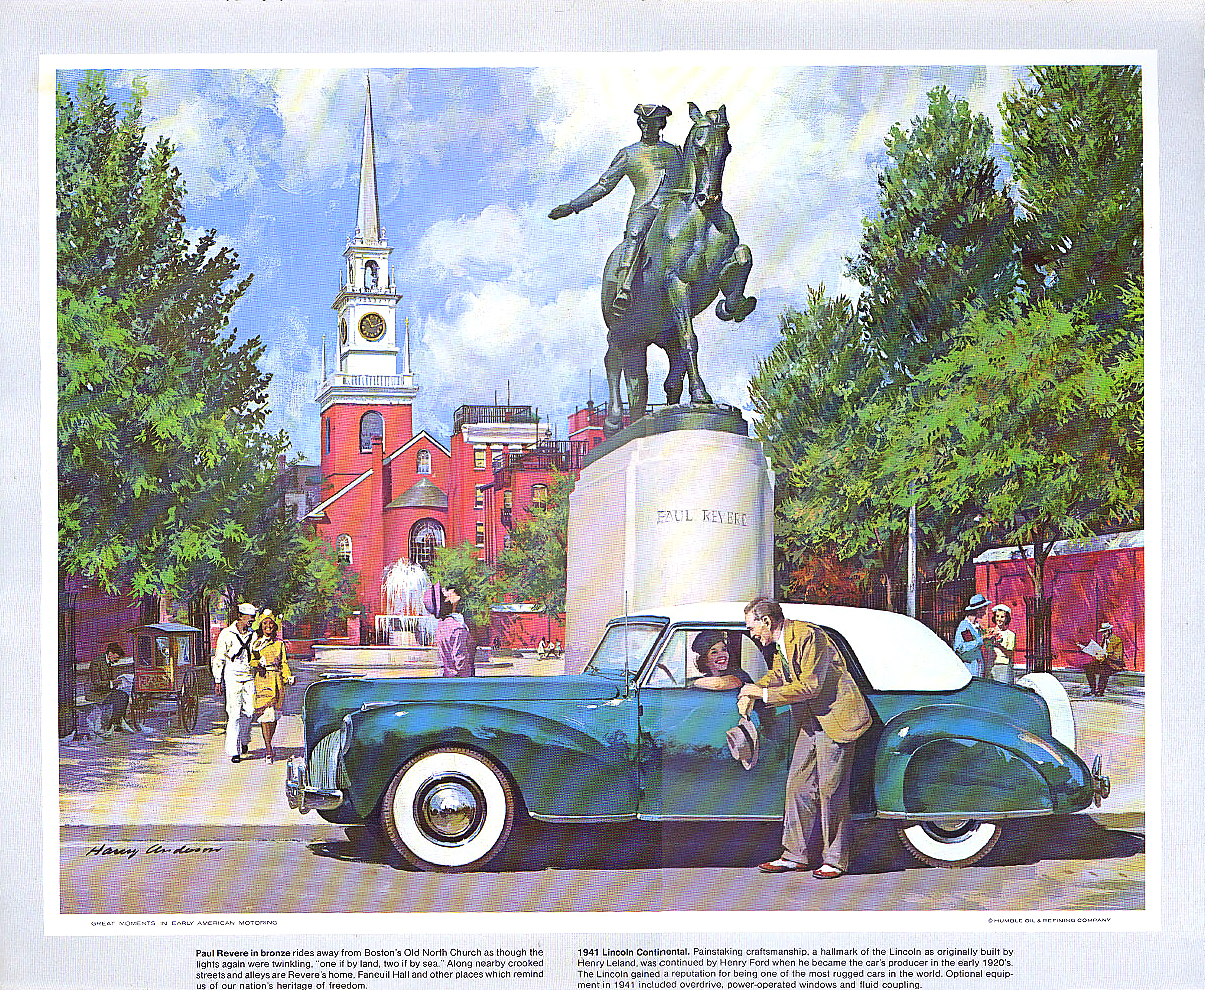 1972-09: Paul Revere in bronze (1941 Lincoln Continental) - Illustrated by Harry Anderson